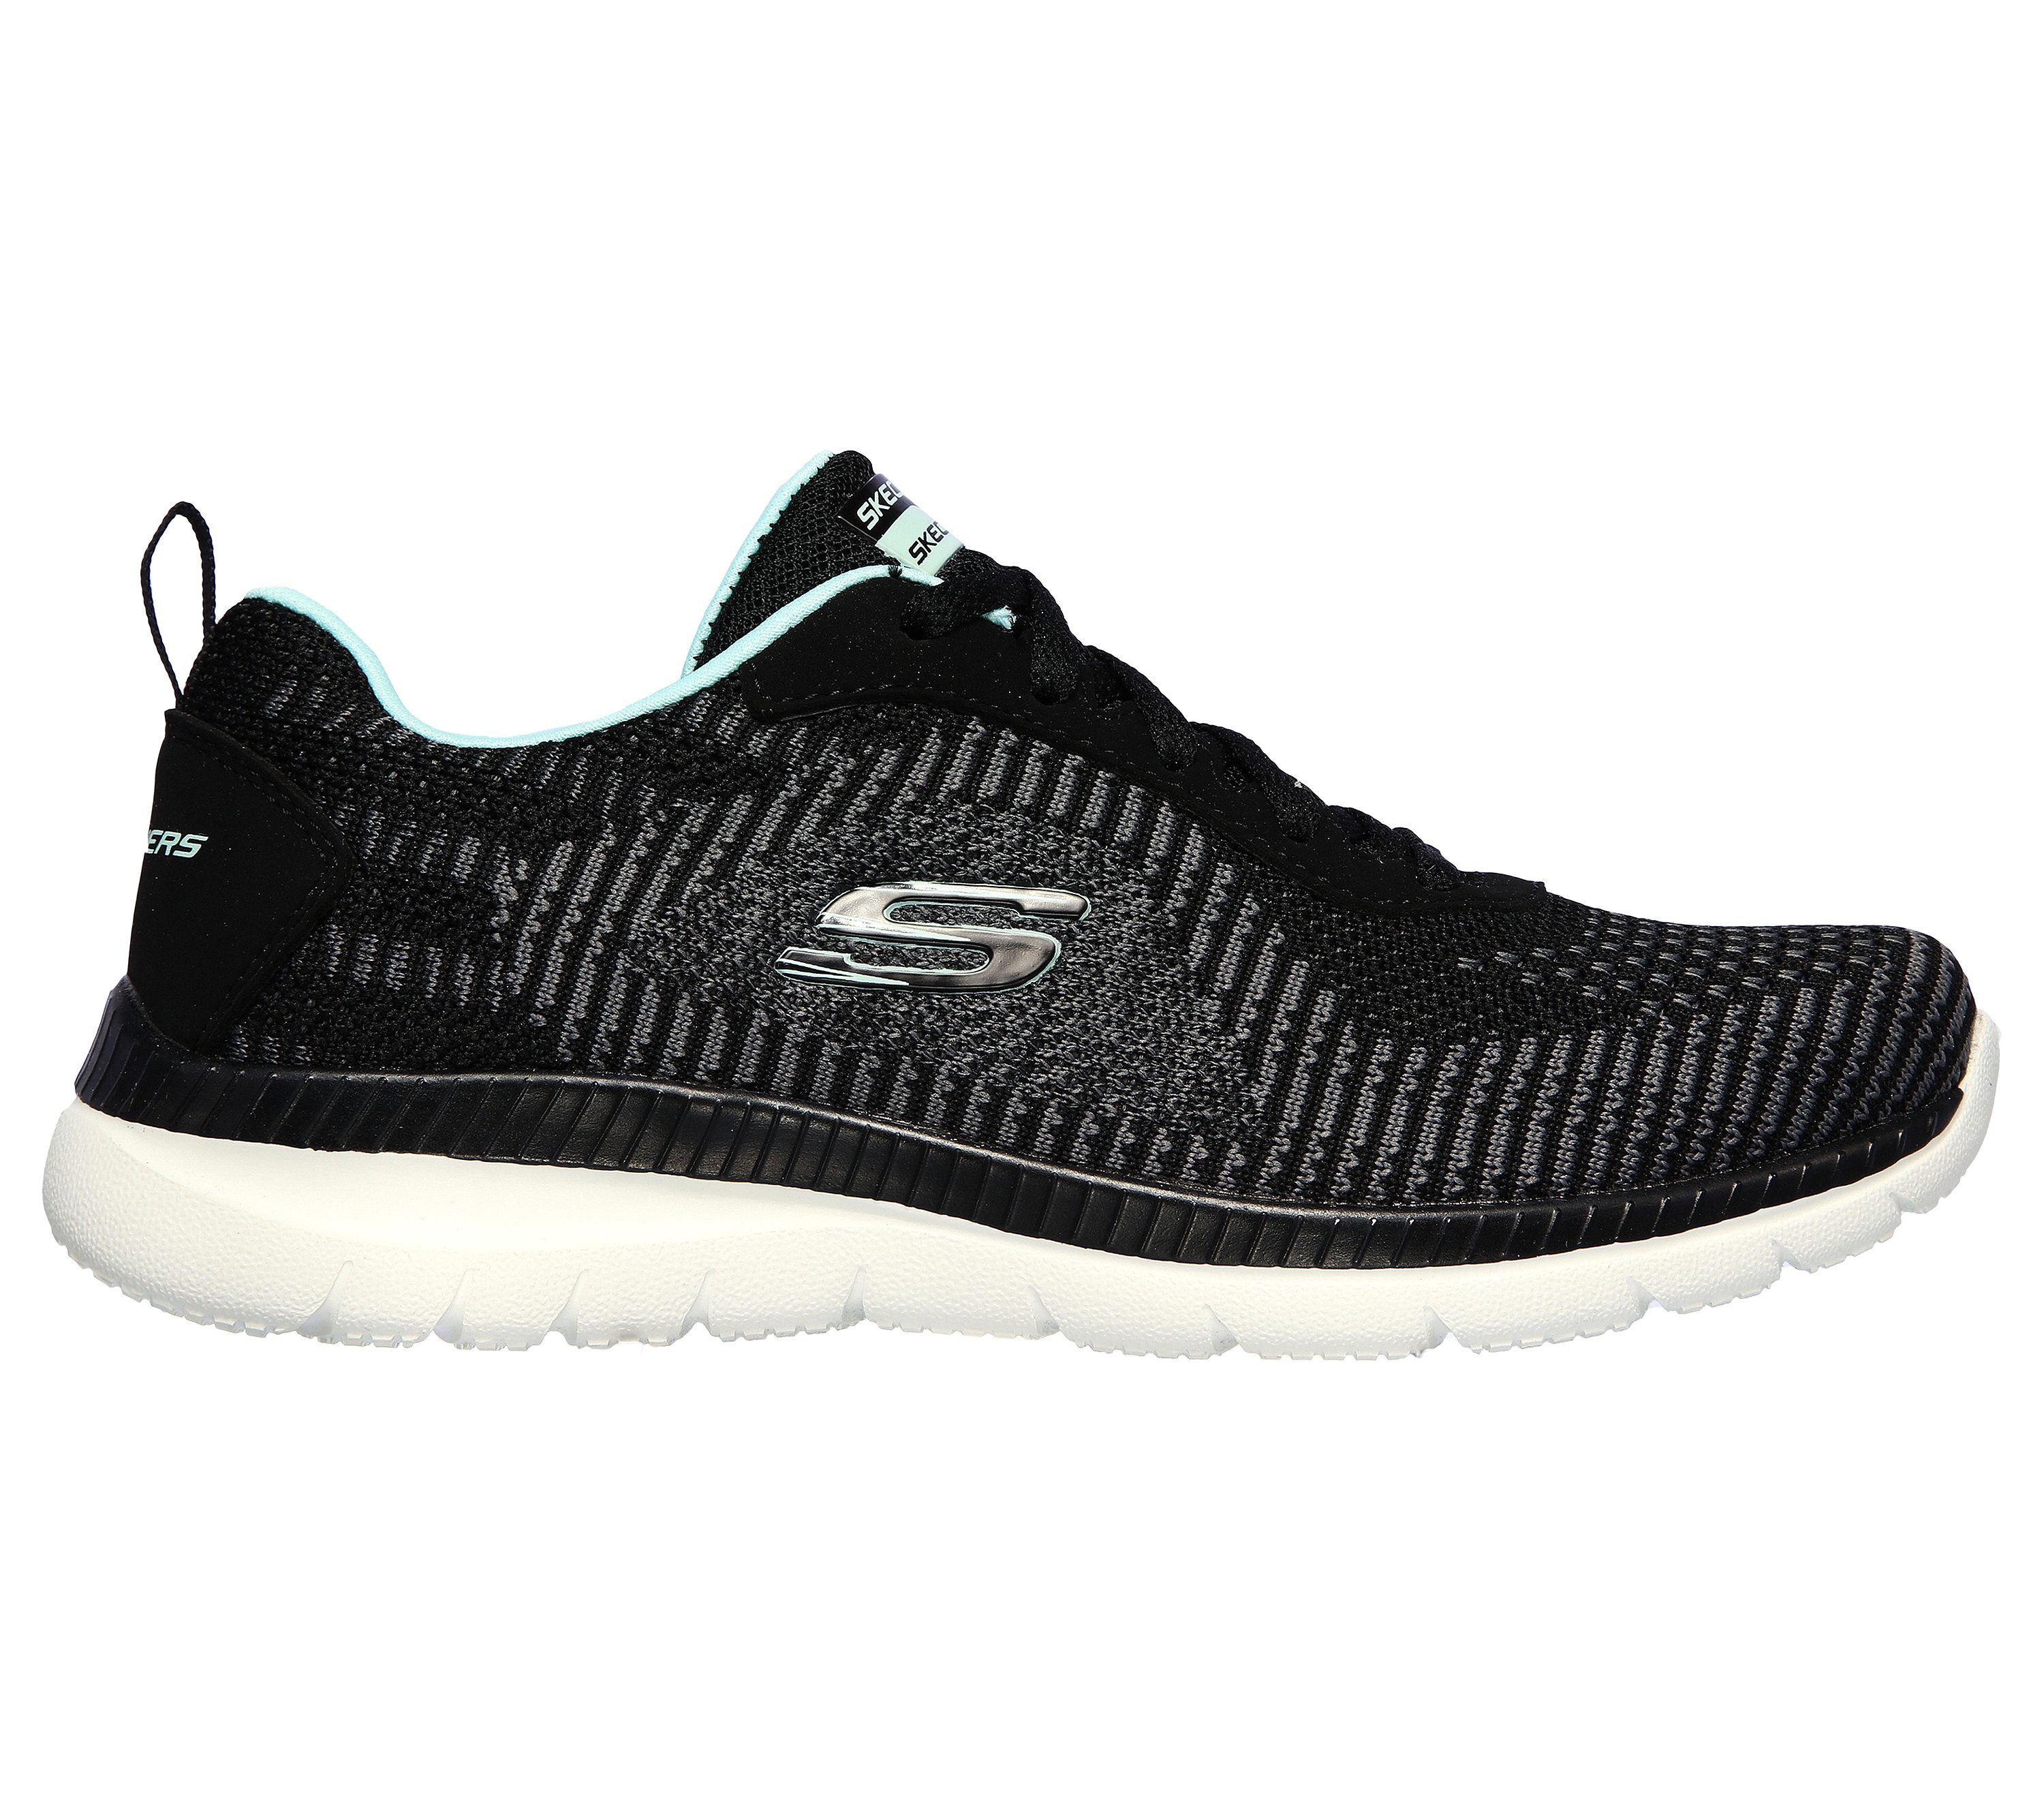 Skechers Bountiful - Purist - Black / Turquoise Polyester